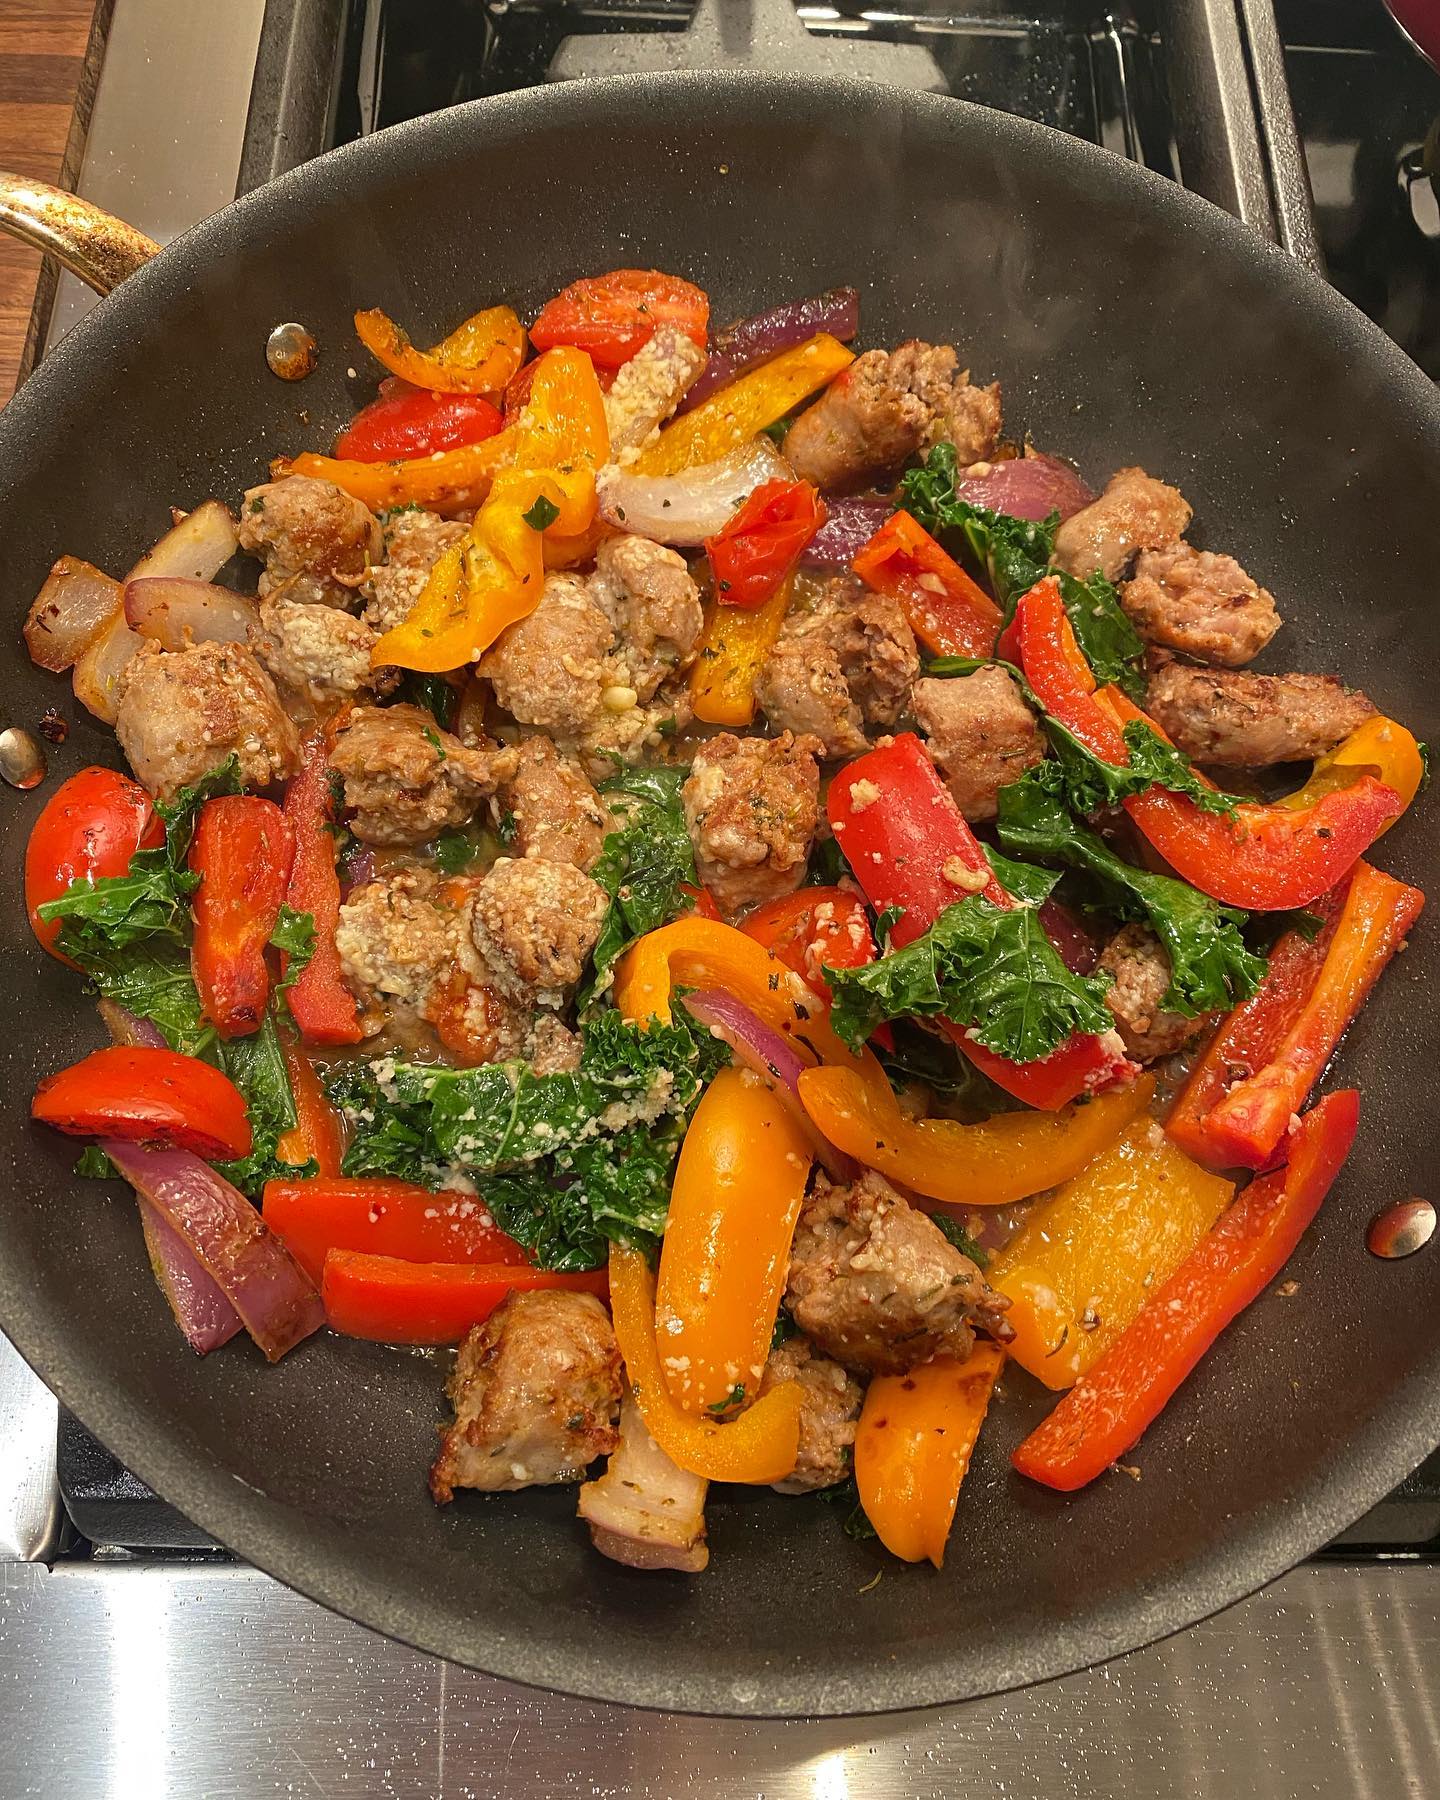 Simple Skillet Suppers are in high demand during the busy holidays. 
This sumptuous sausage & peppers dinner is on the table in 30 minutes. 
Link in bio for the full recipe. 
.
.
.
.
#skilletsupper 
#sausage 
#quickmeals 
#december 
#comfortfood 
#winterpark